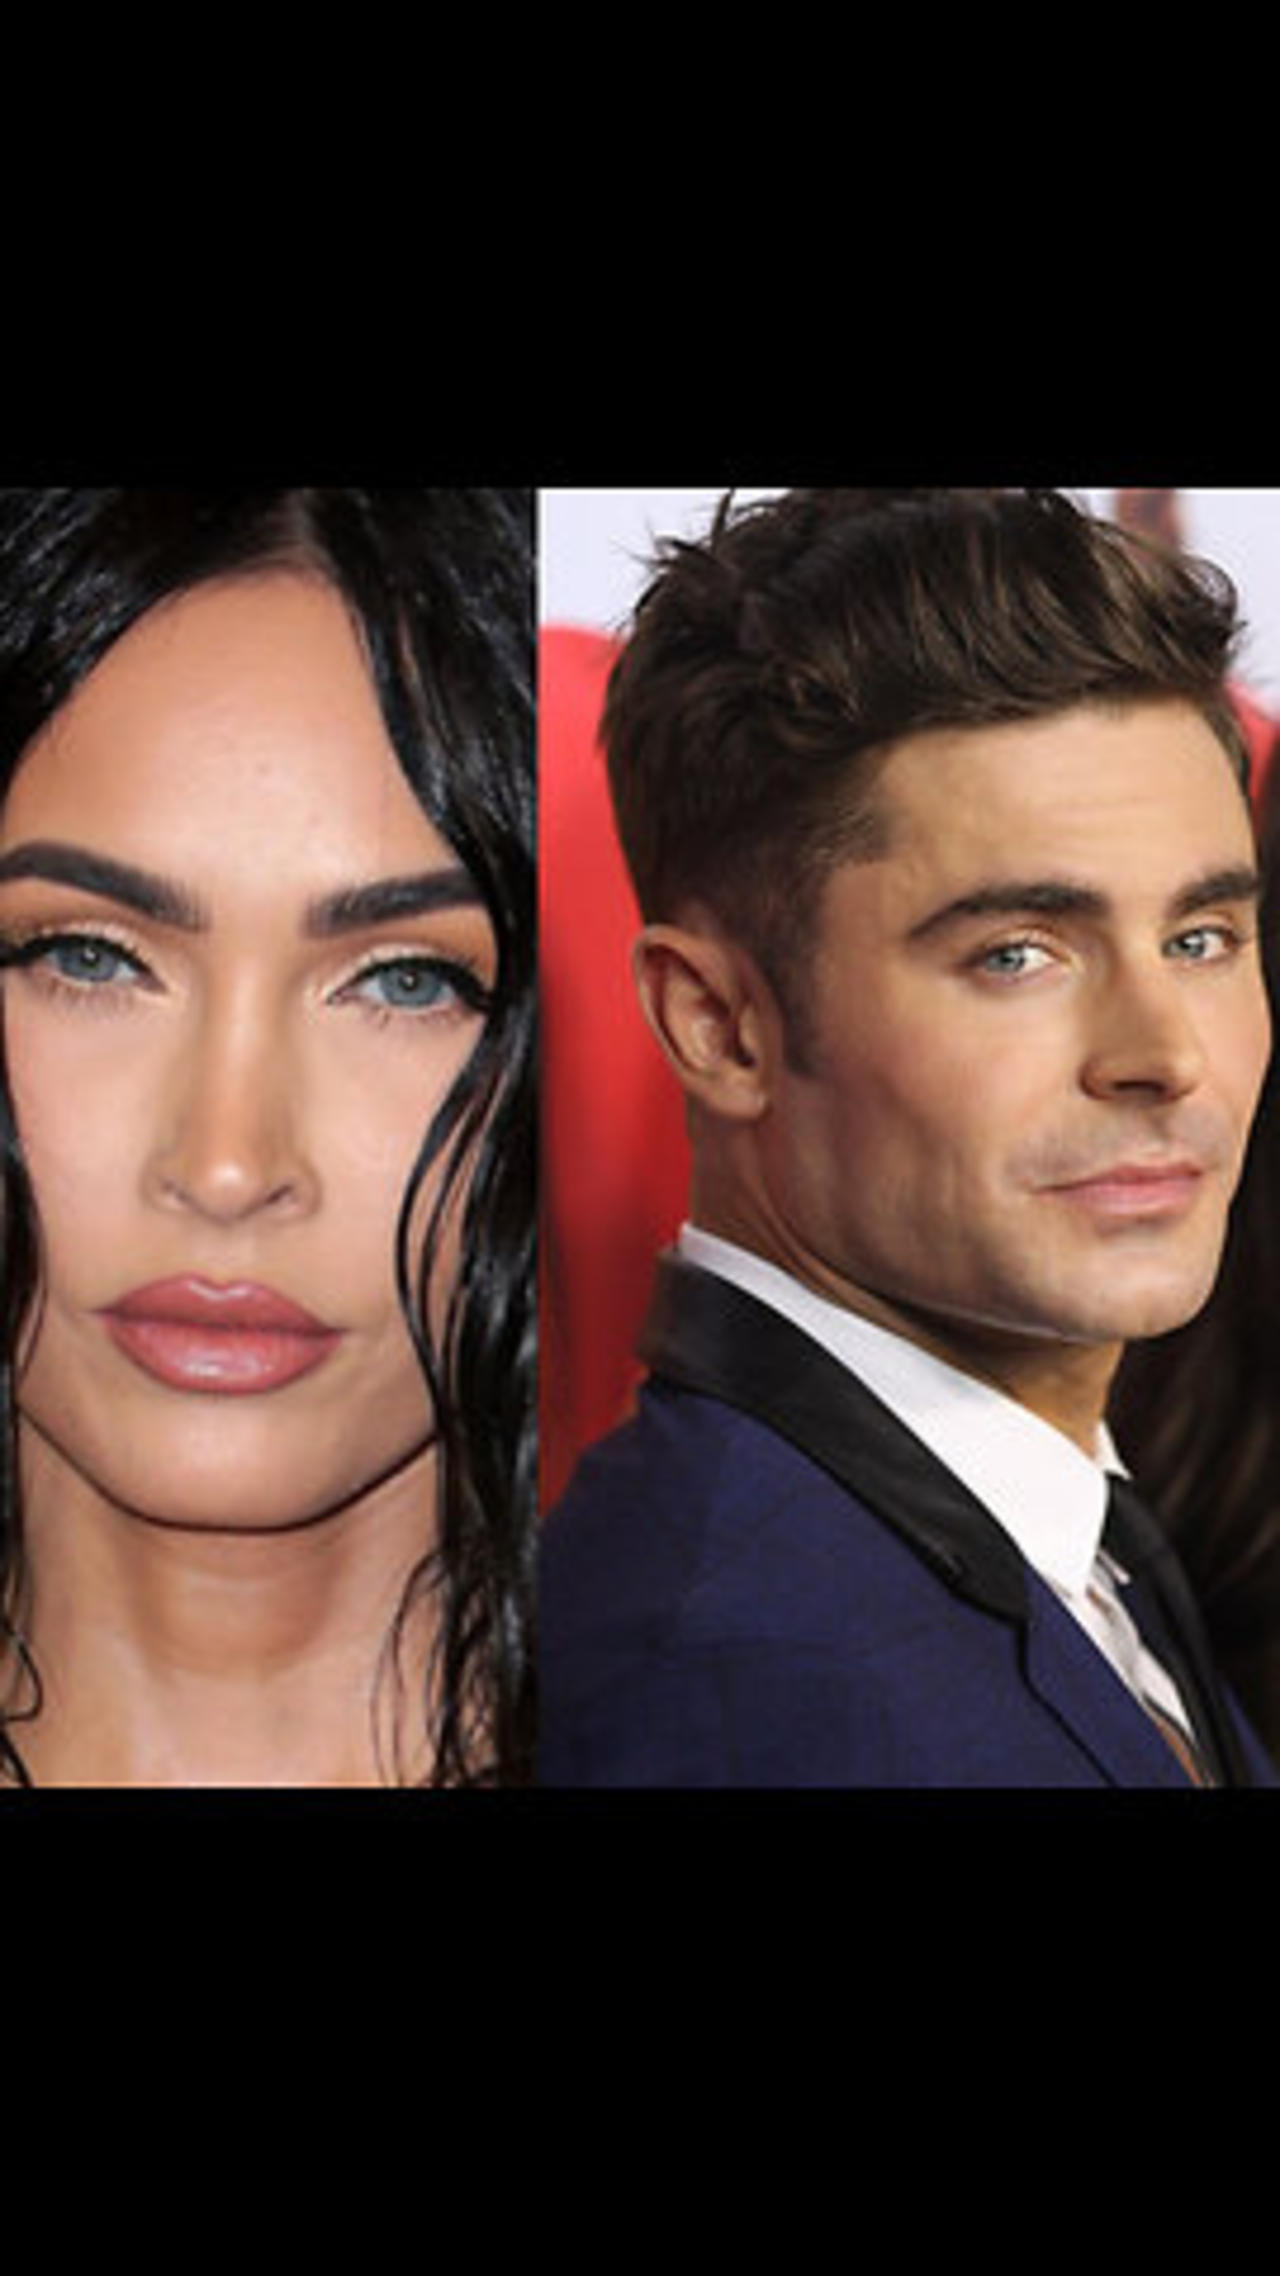 MEGHAN FOX SAYS HER AND ZAC EFRON ARE THE SAME PERSON 👀😂🤣